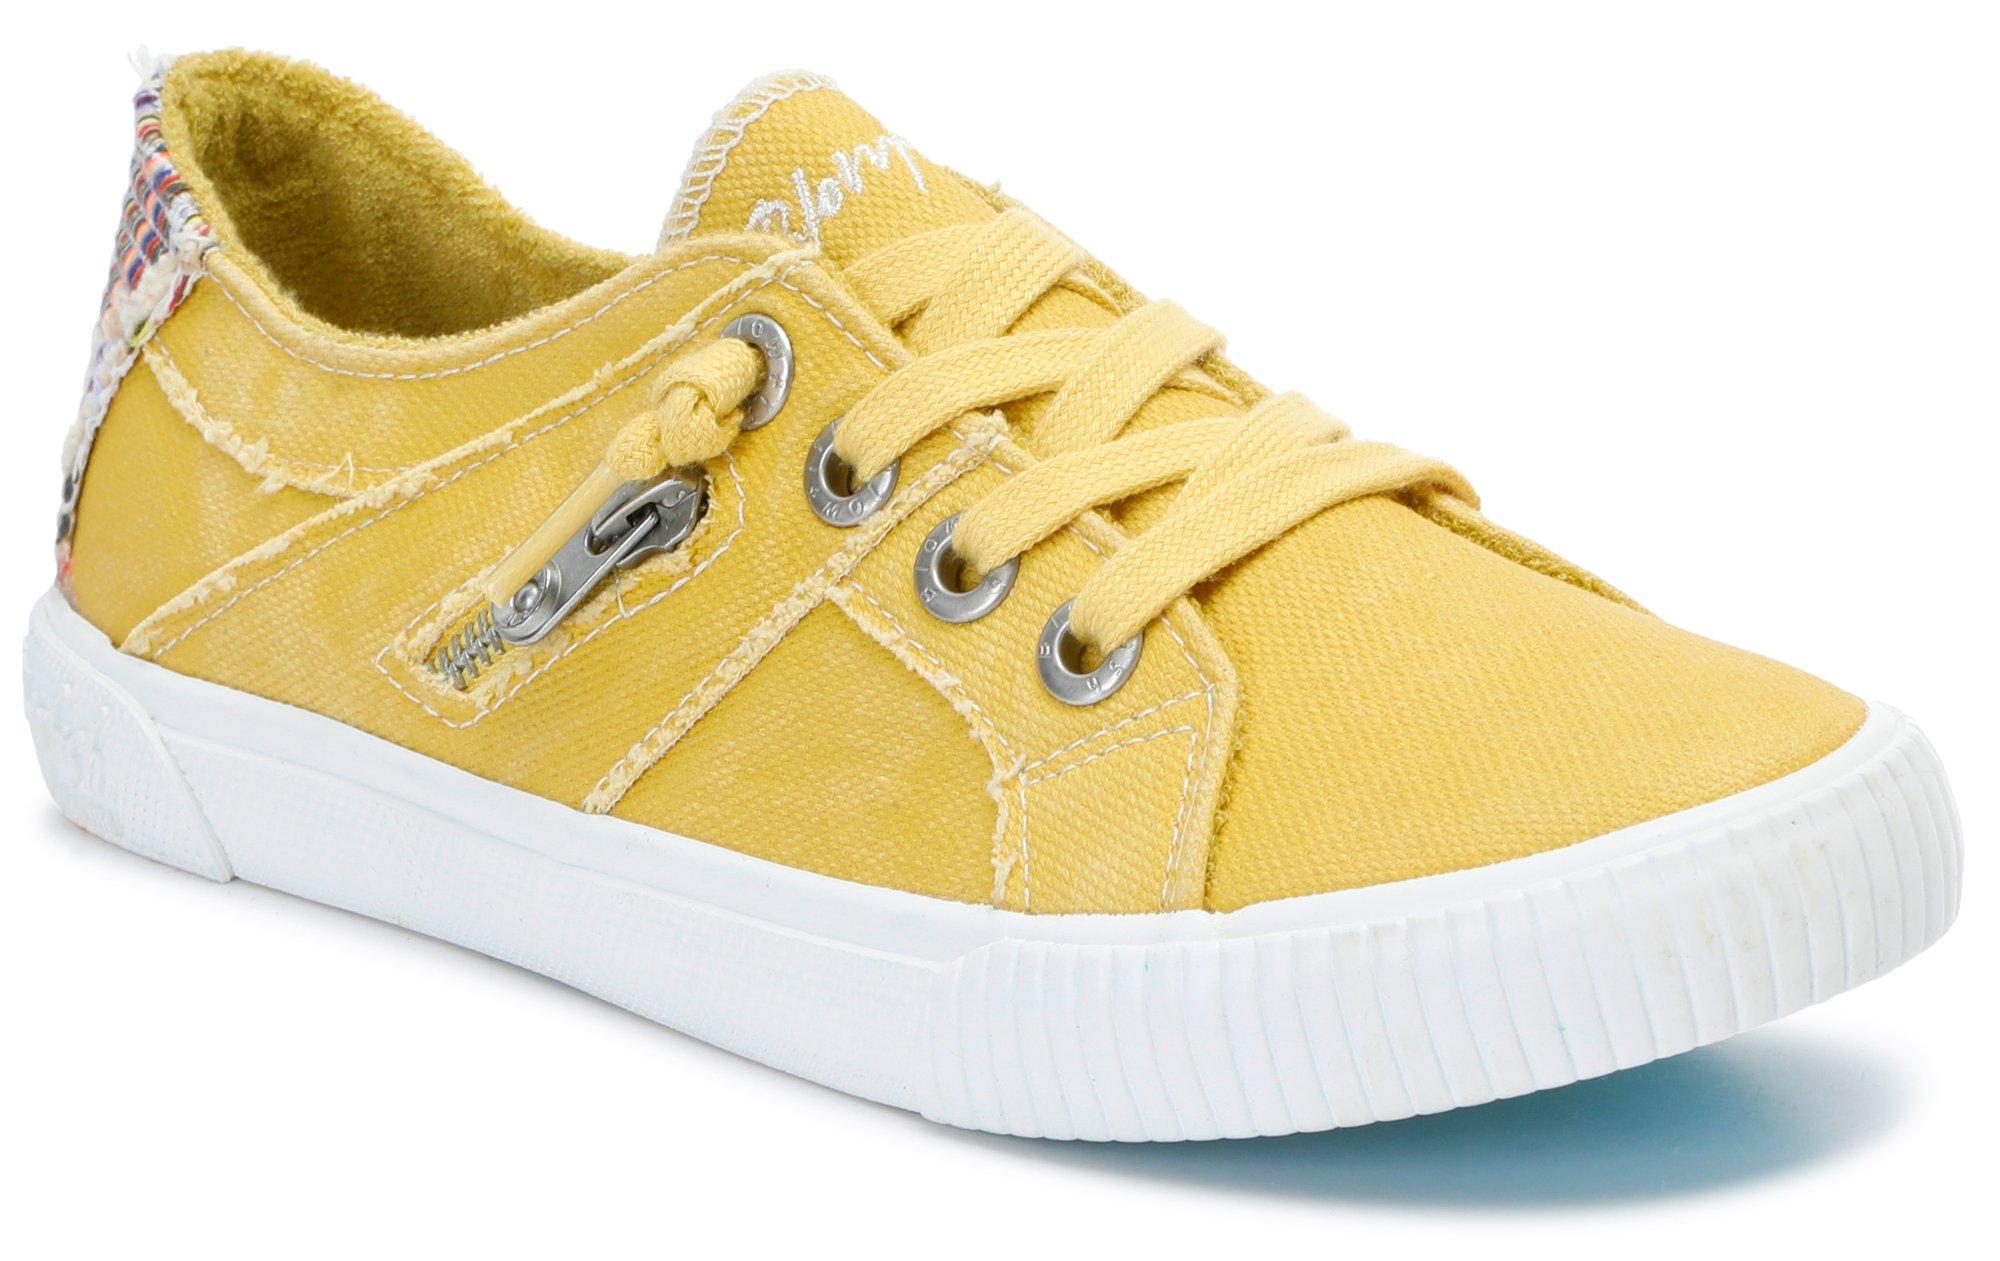 Women's Solid Canvas Casual Sneakers